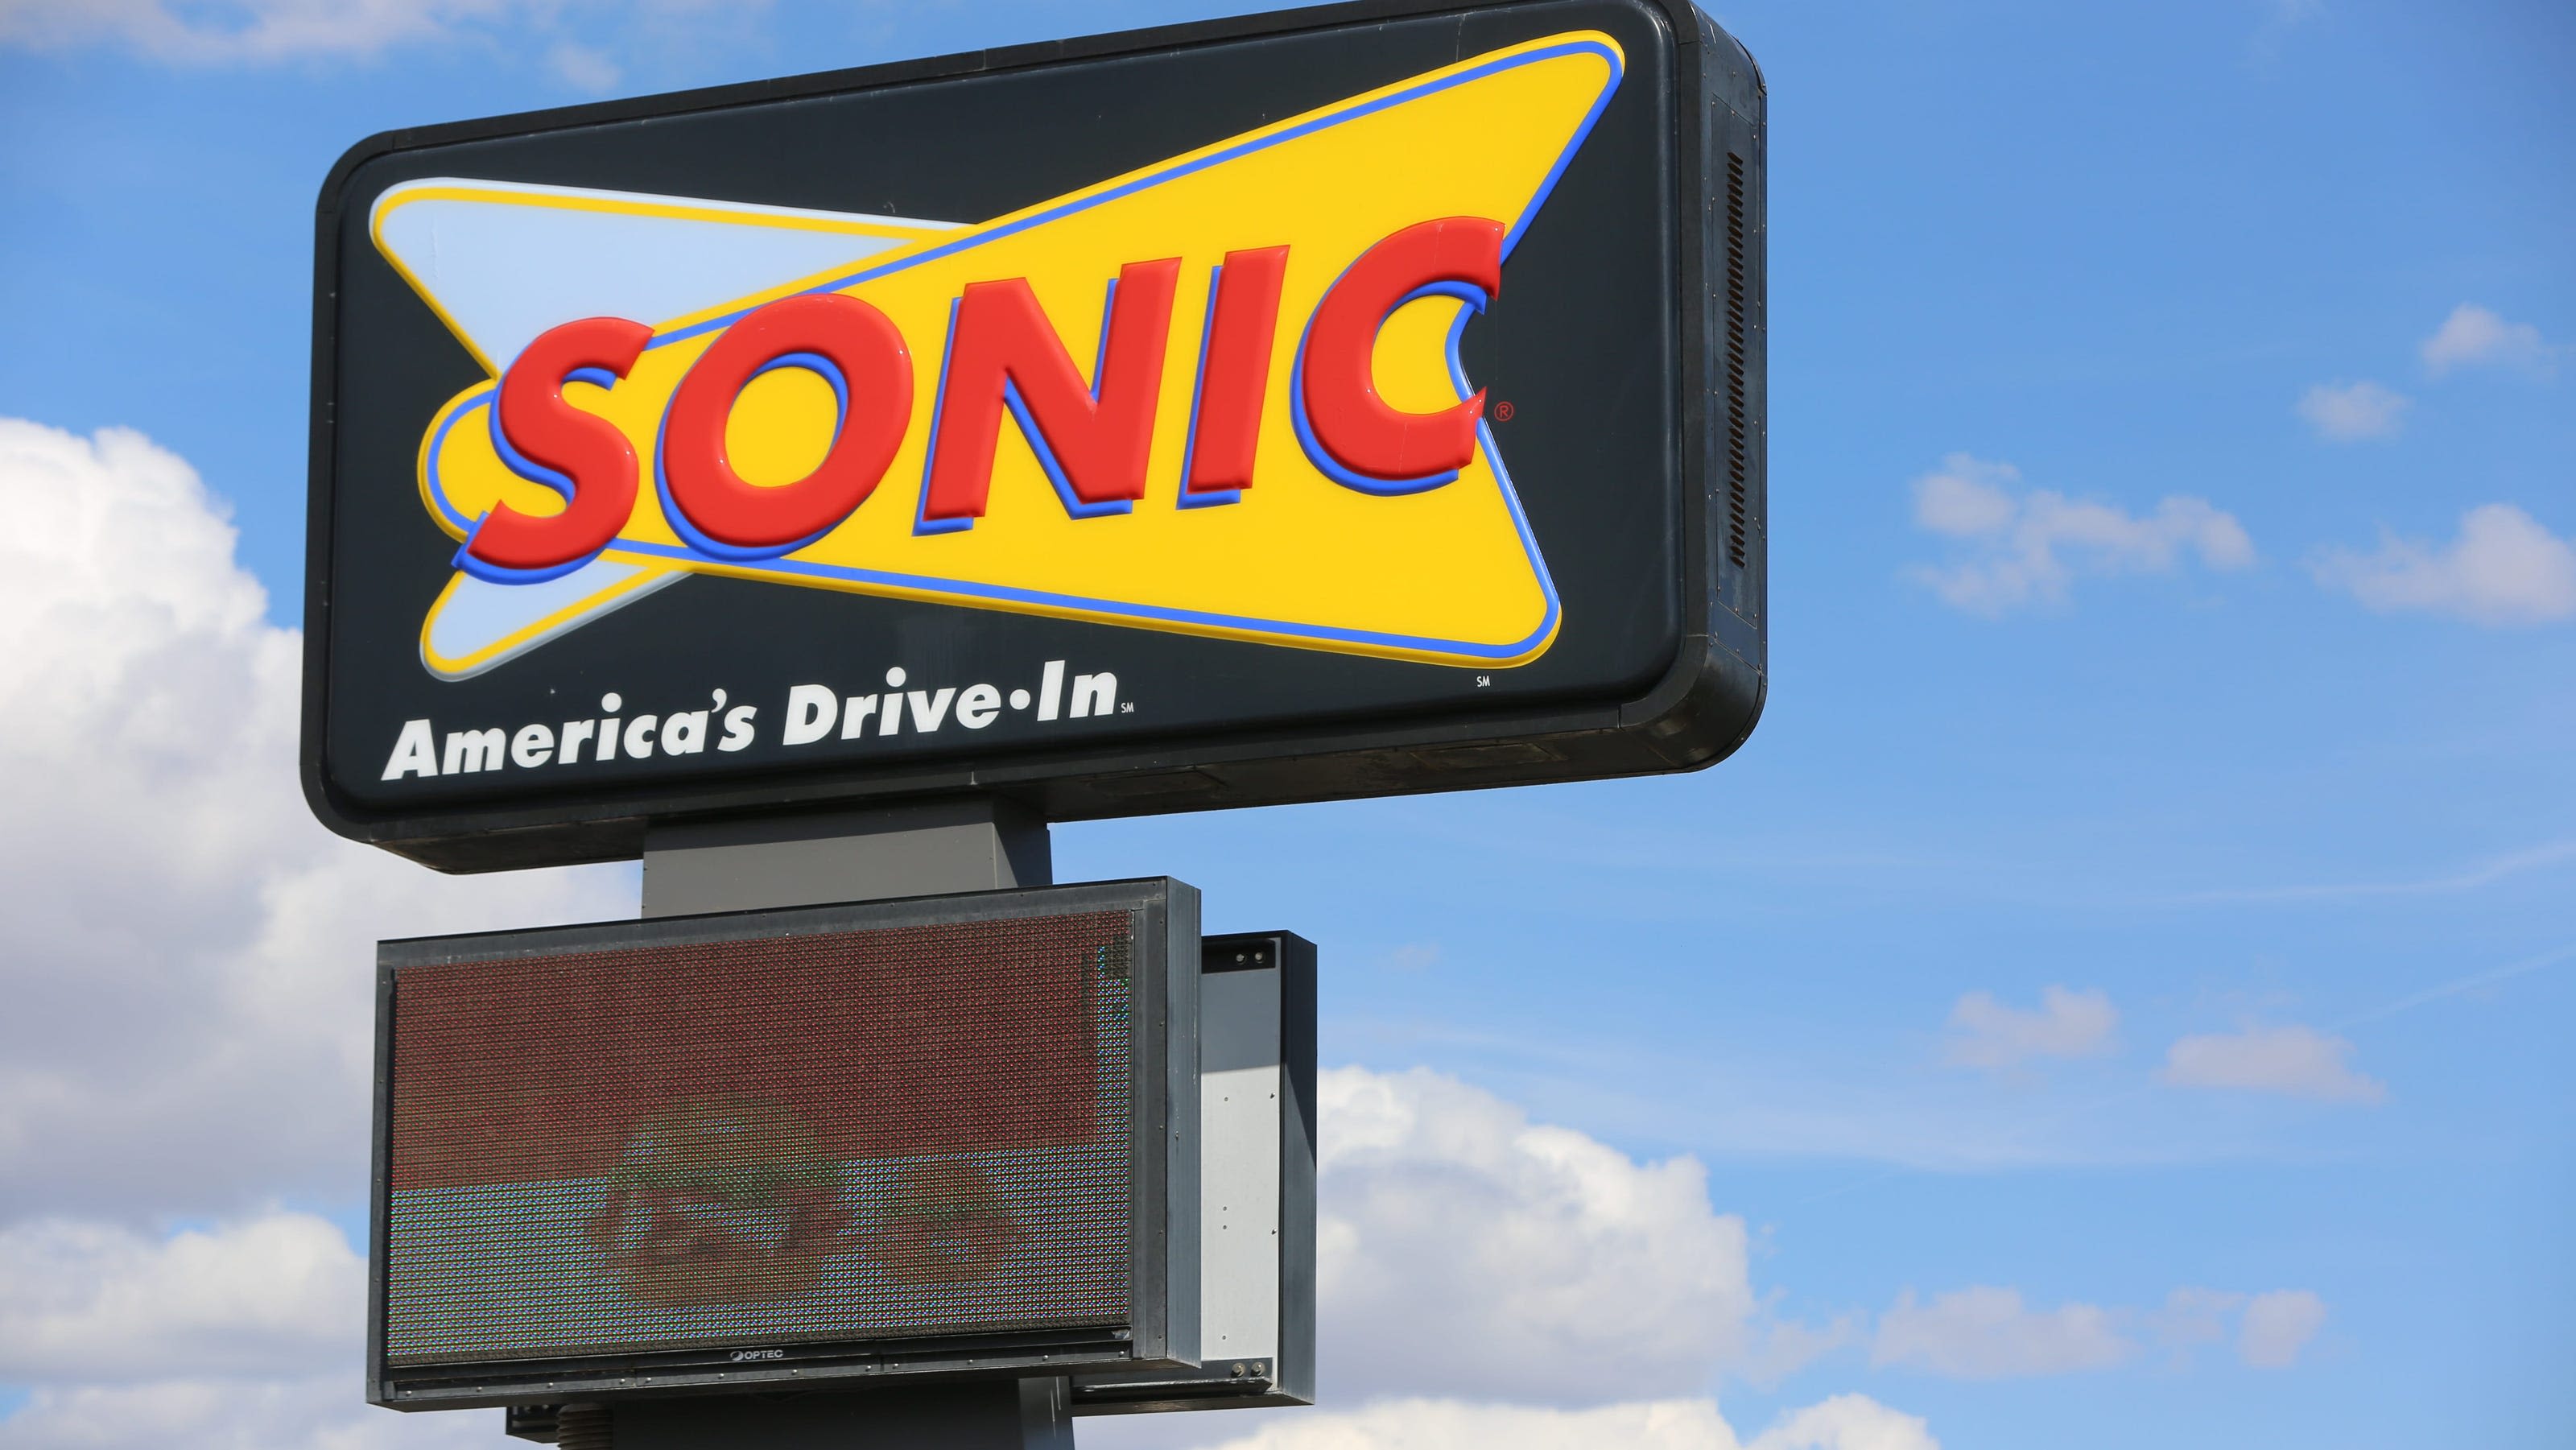 Dr. Pepper and pickles? Sounds like a strange combo, but many are heading to Sonic to try it